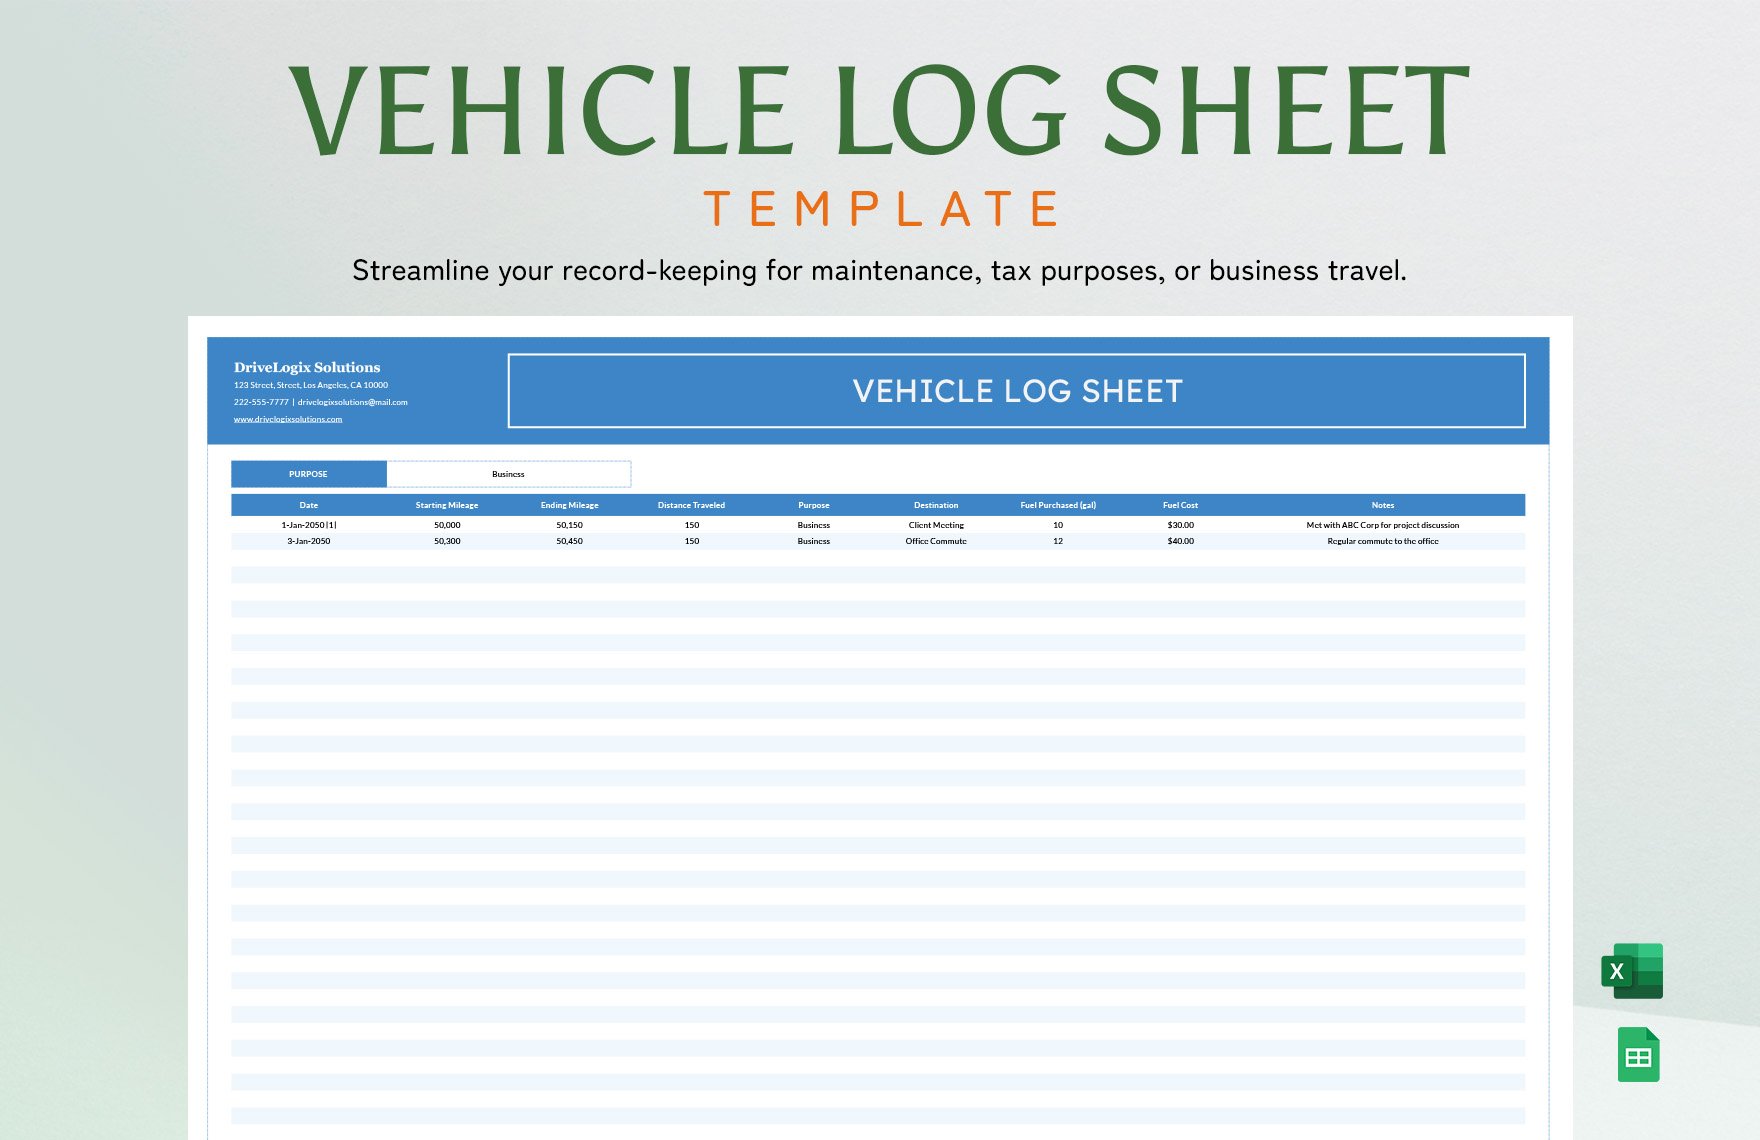 Vehicle Log Sheet Template in Excel, Google Sheets